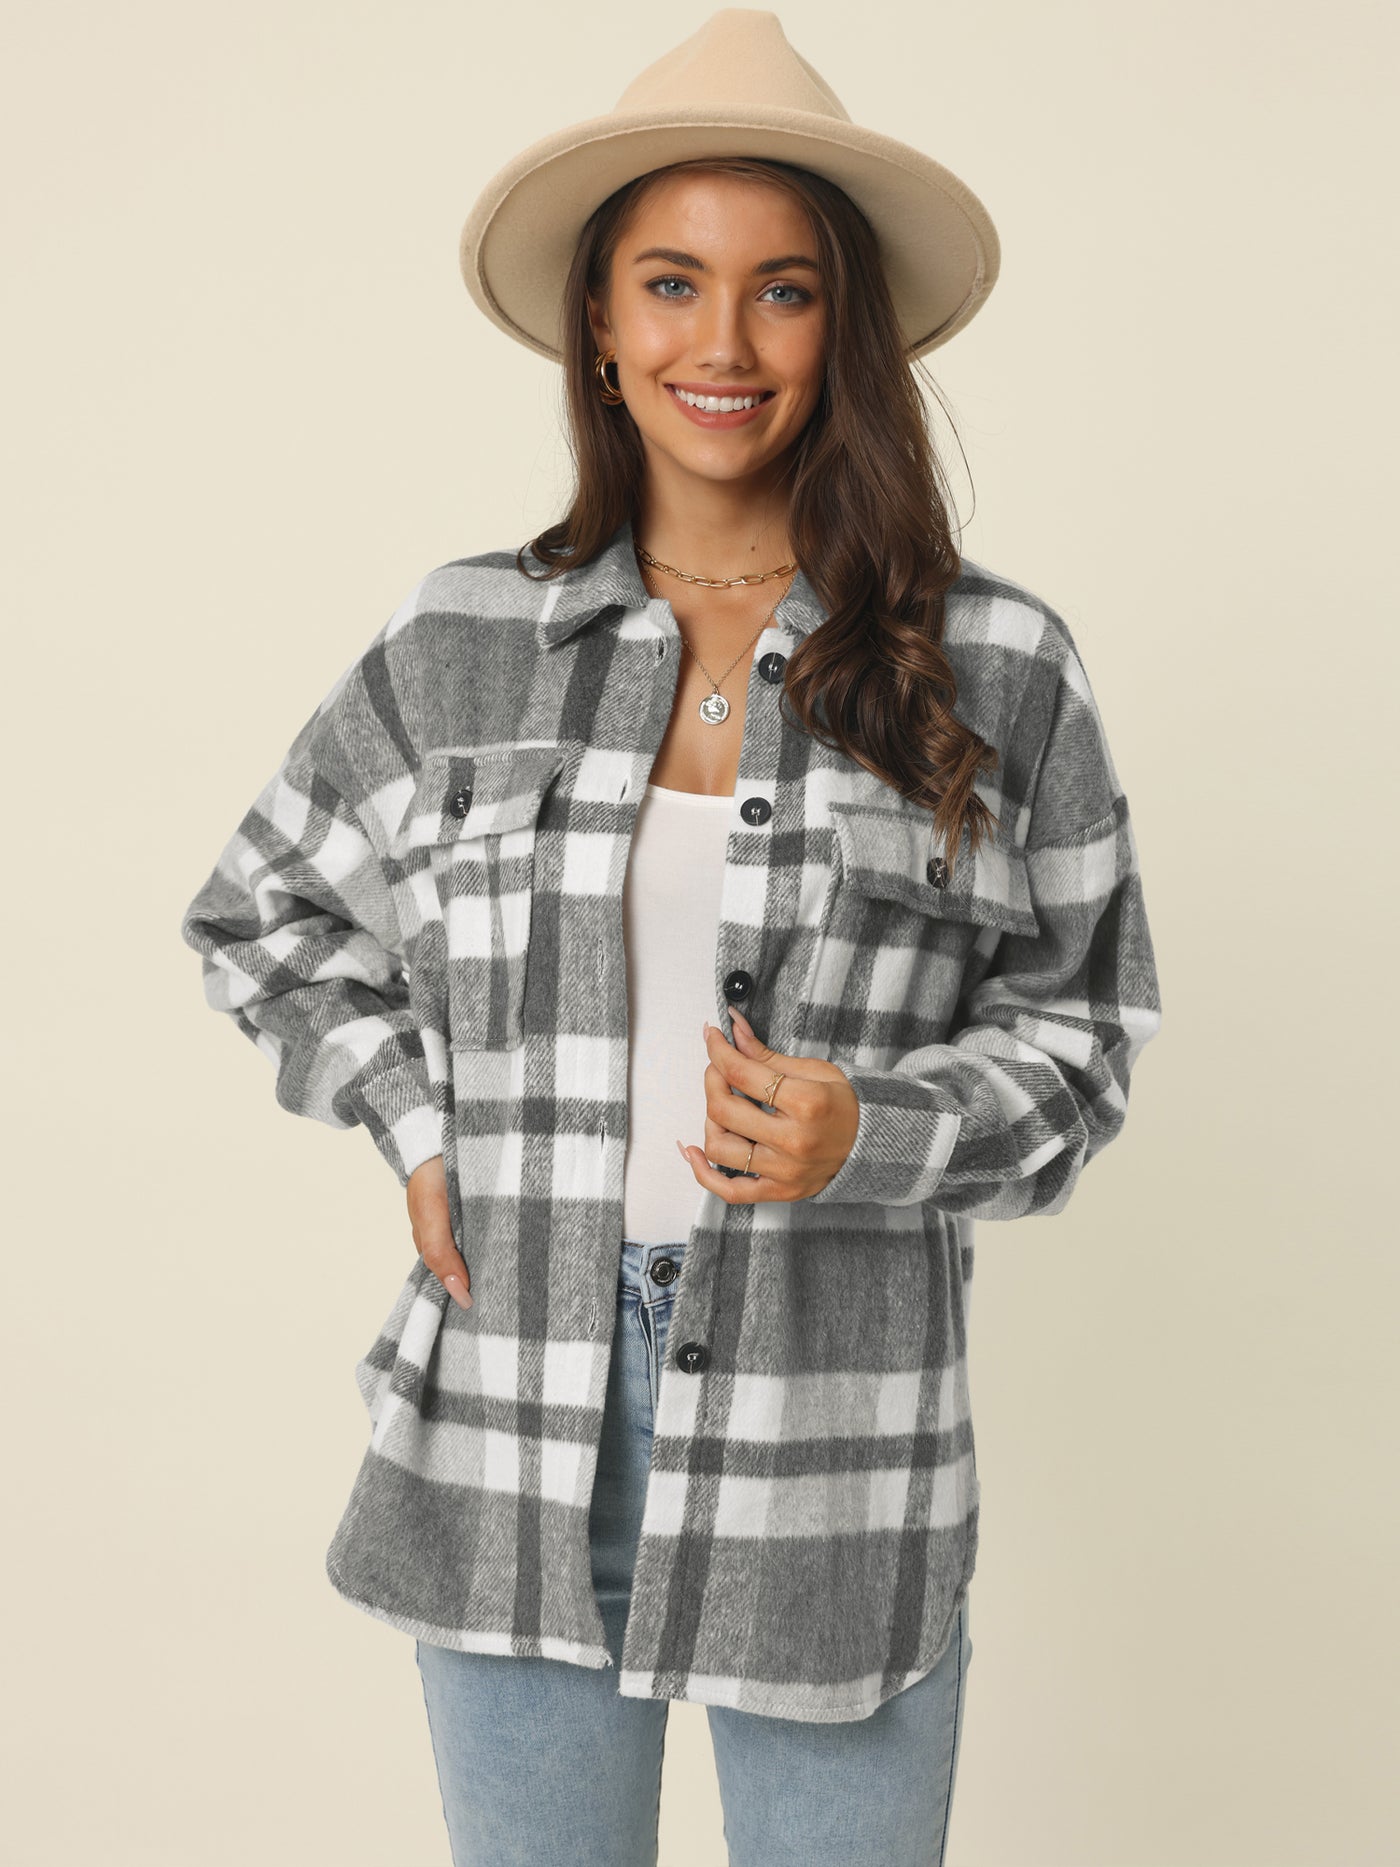 Bublédon Womens' Fall Winter Button Front Closure Long Sleeve Plaid Jacket with Pockets